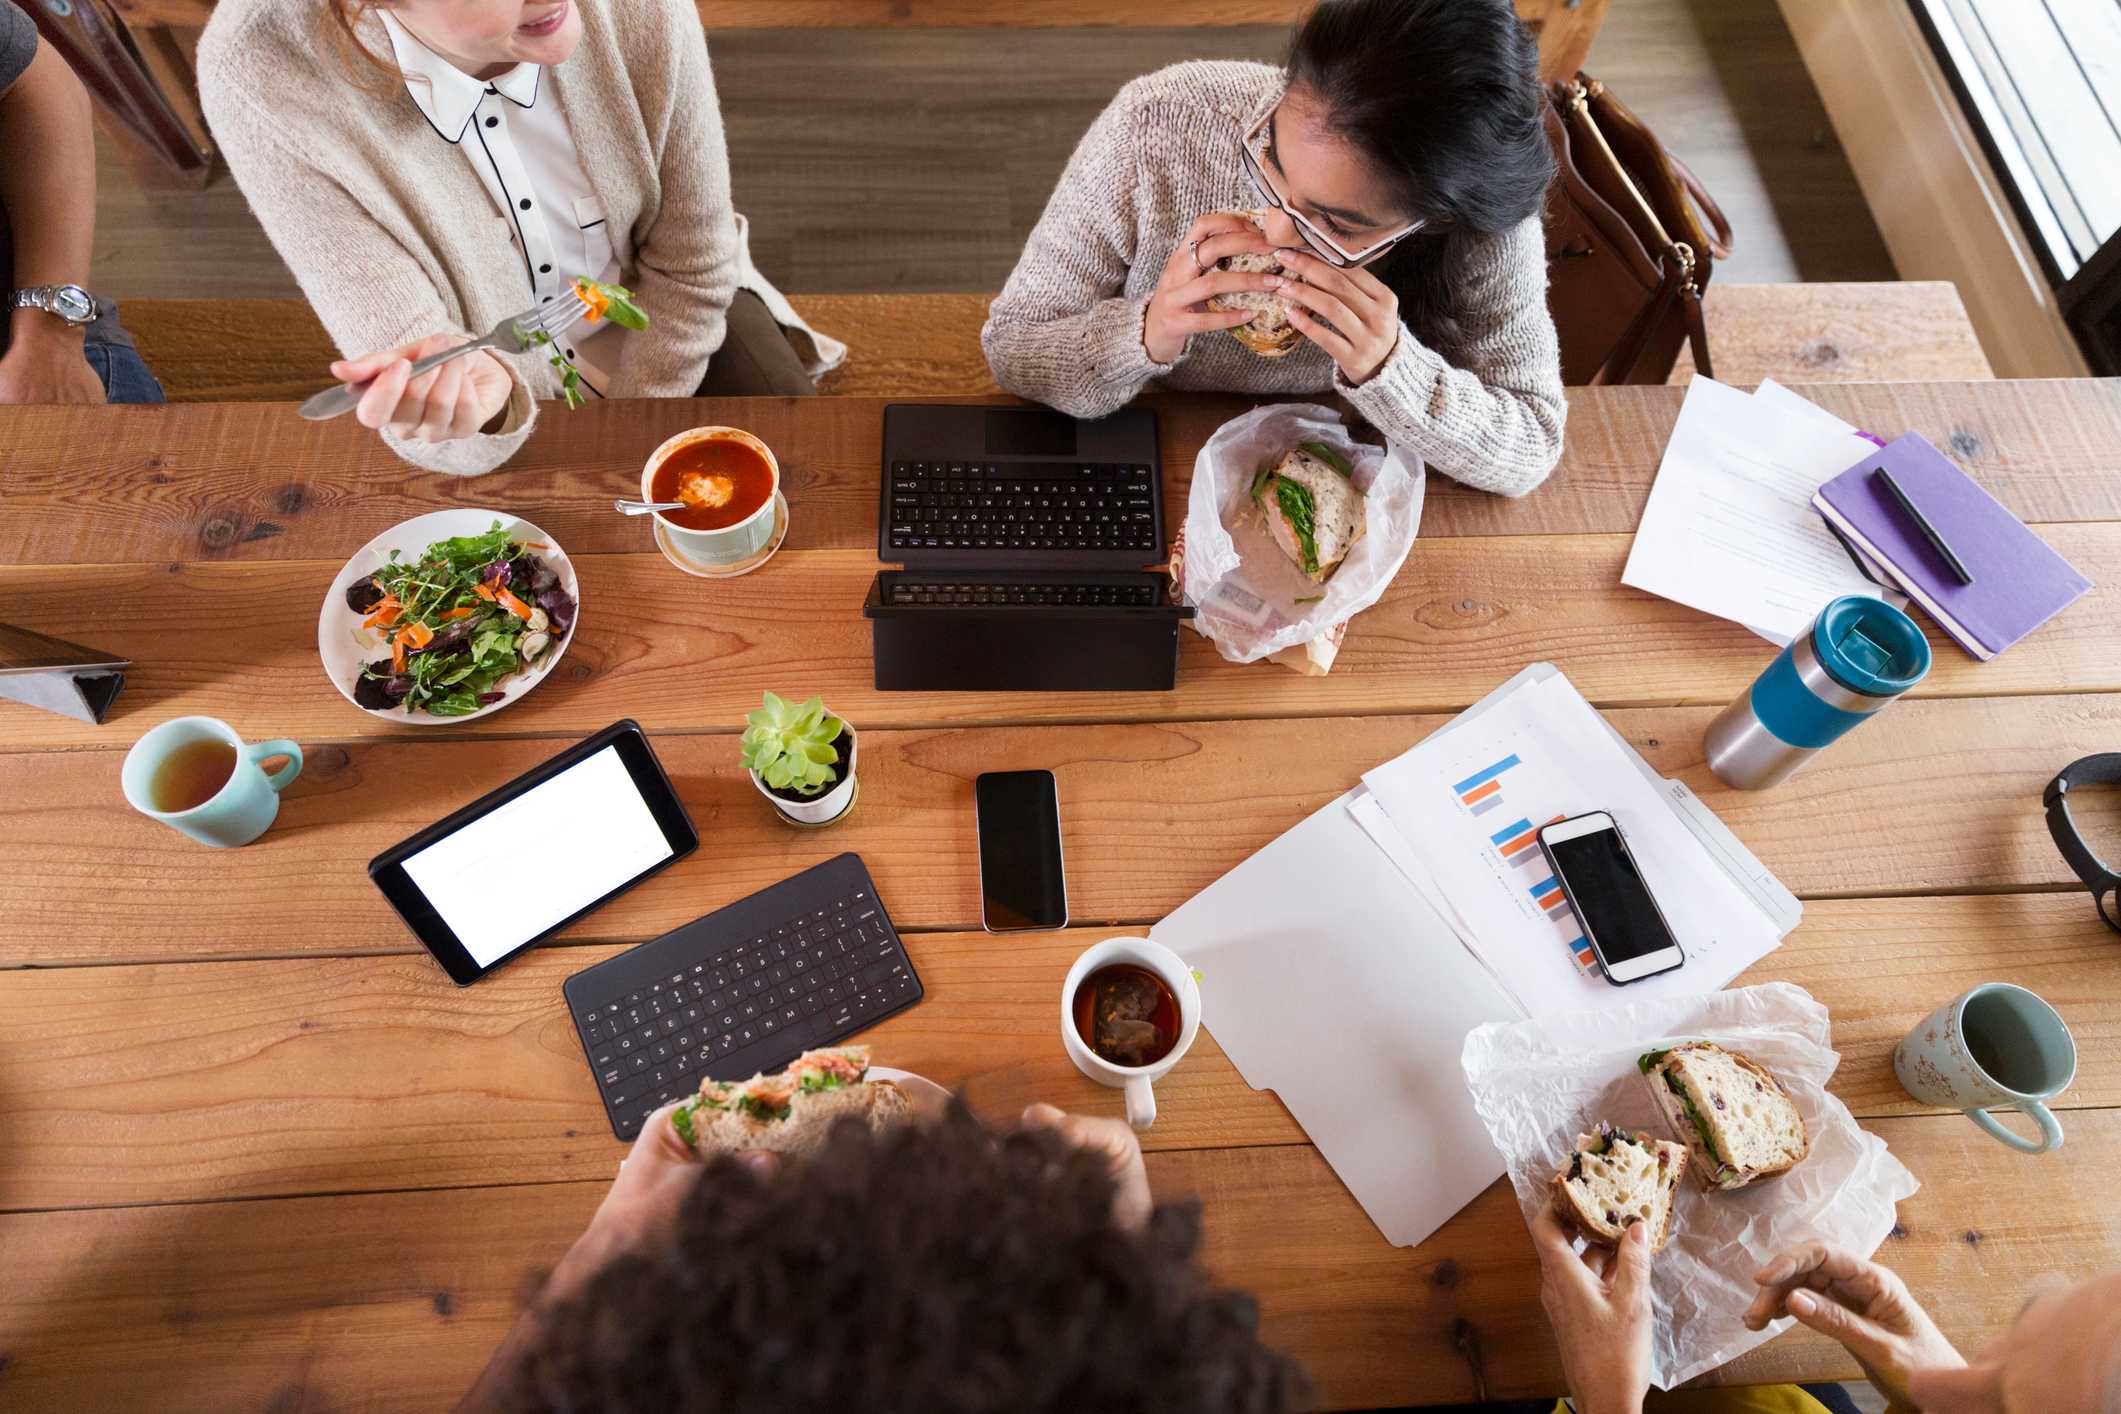 Why Group Meals Make a Great Employee Perk